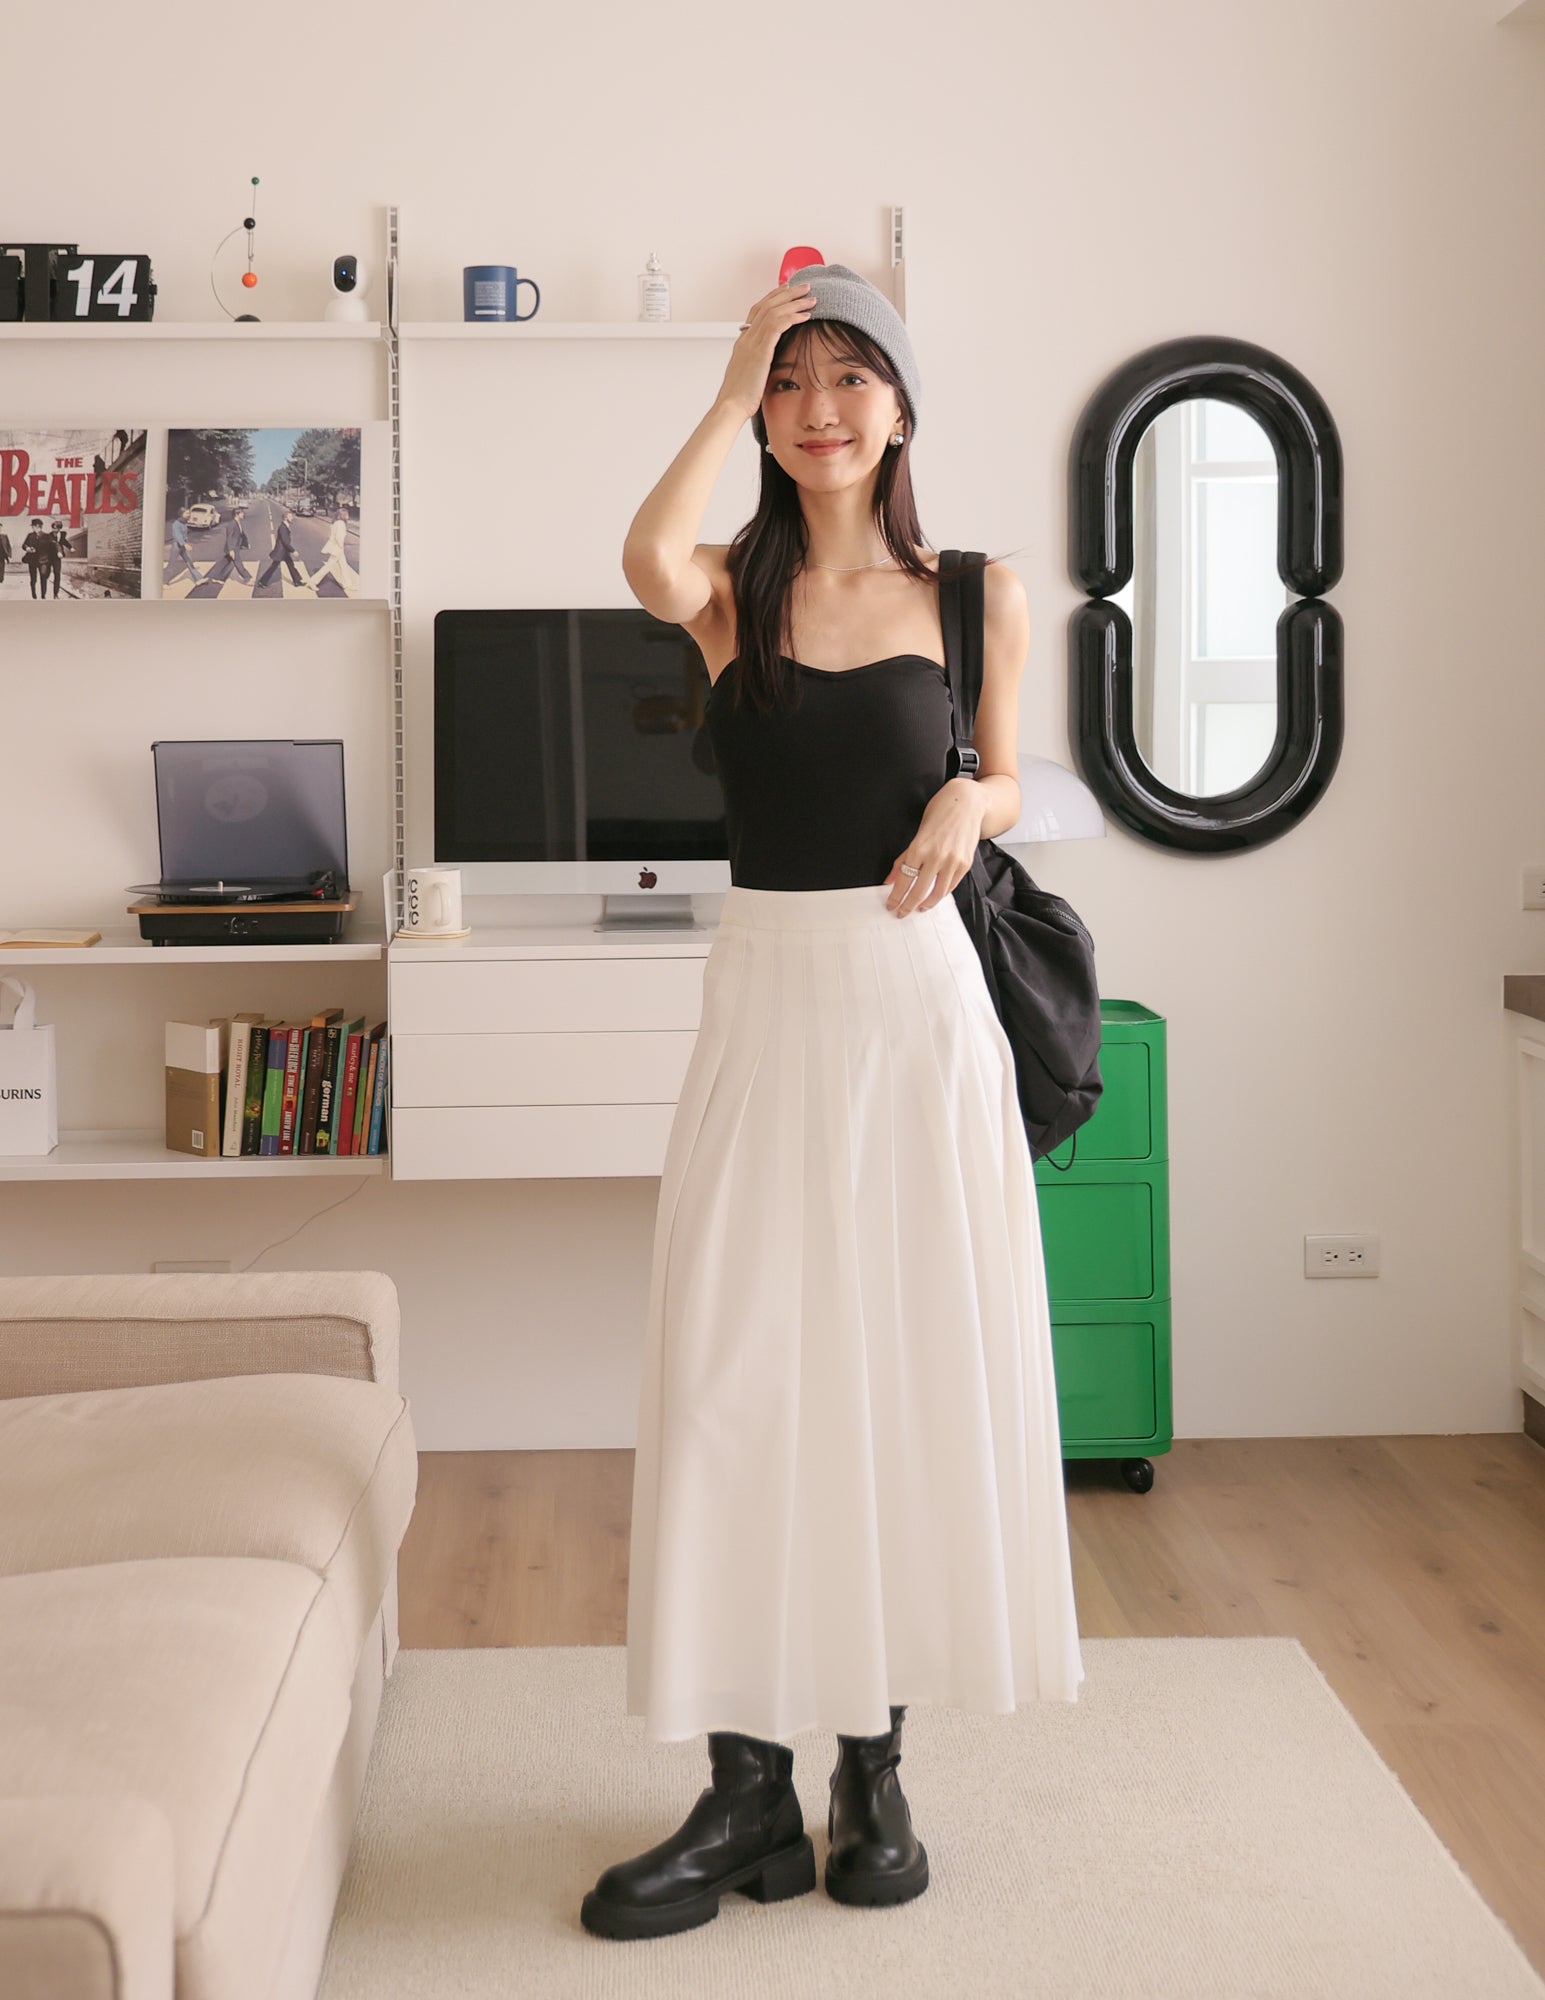 Colette Pleated Skirt in White